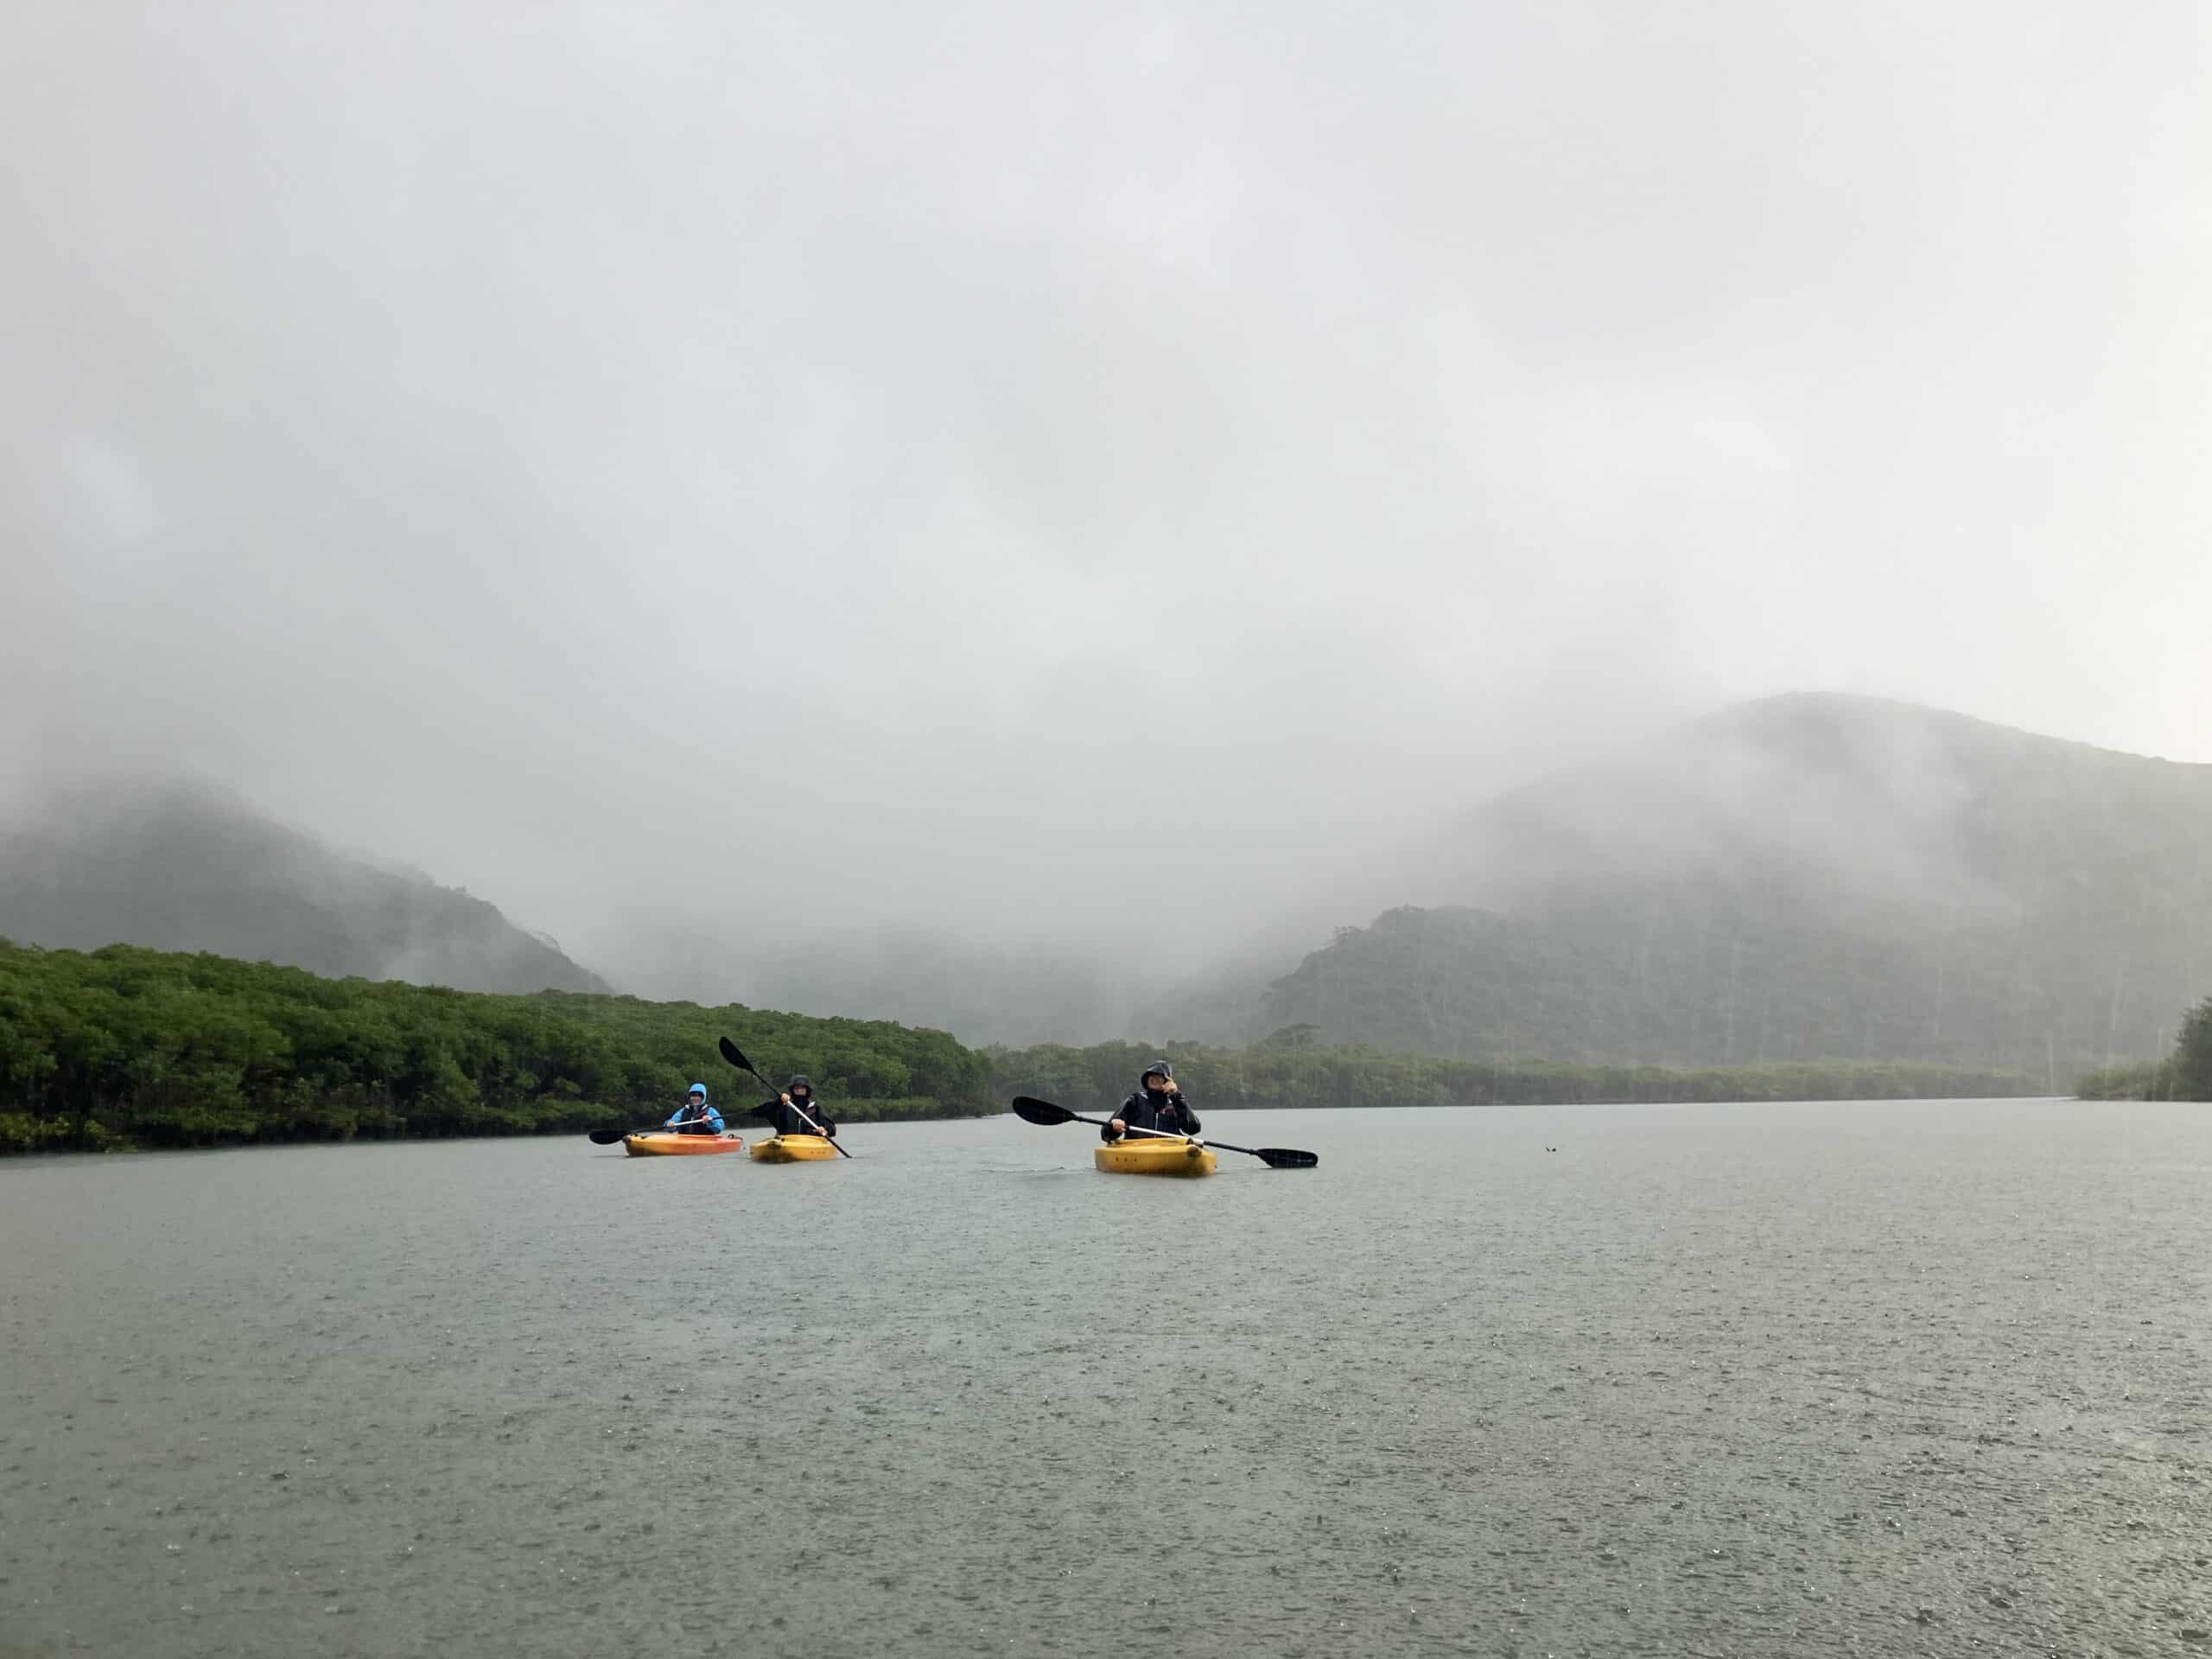 The Unique Atmosphere of Rainy Day Mangroves and the Majestic Views of the Mountains in Amami Oshima.